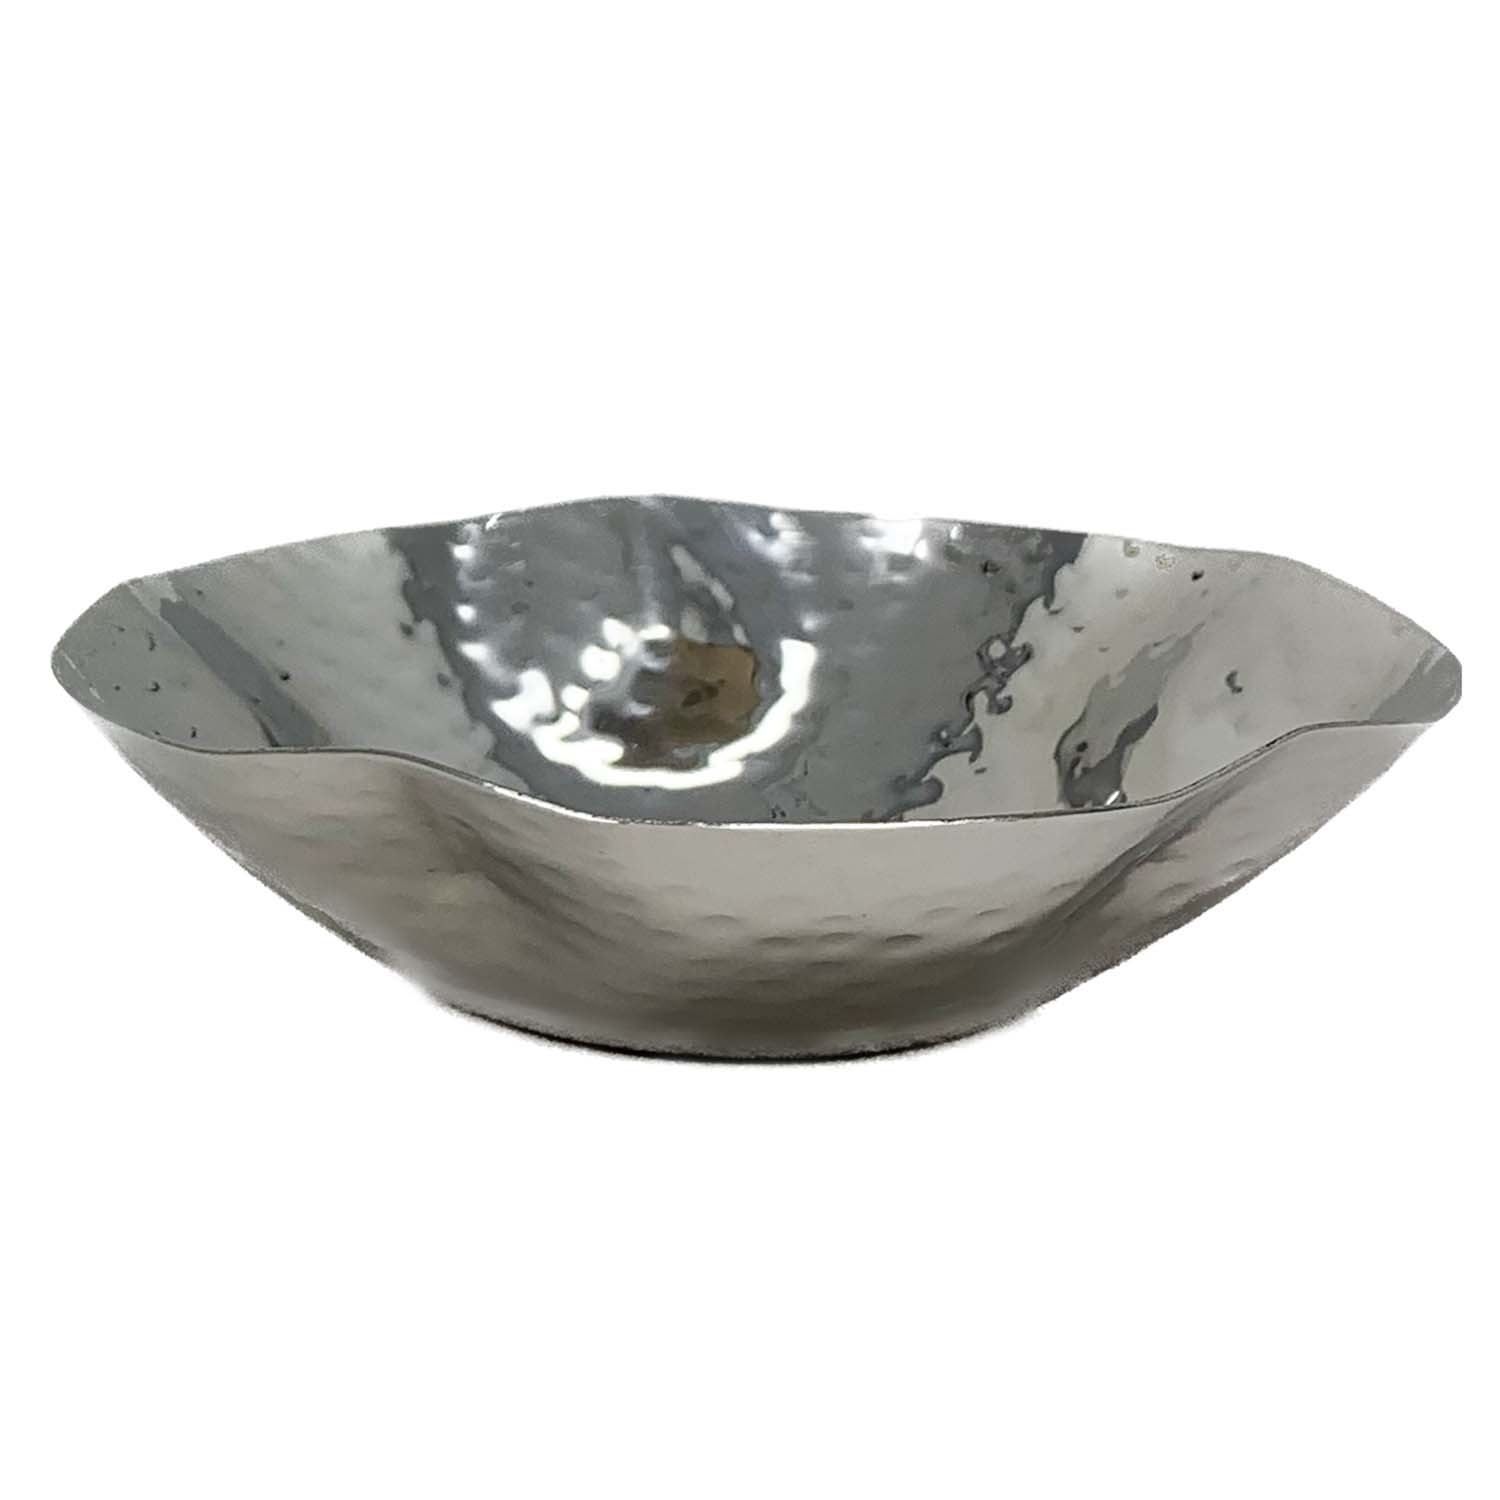 Stainless Steel Food Serving Bowl Candy Nut Dish Hammer Metal DesignHigh Quality Curved Hammered Nut Bowl Stylish Design #2